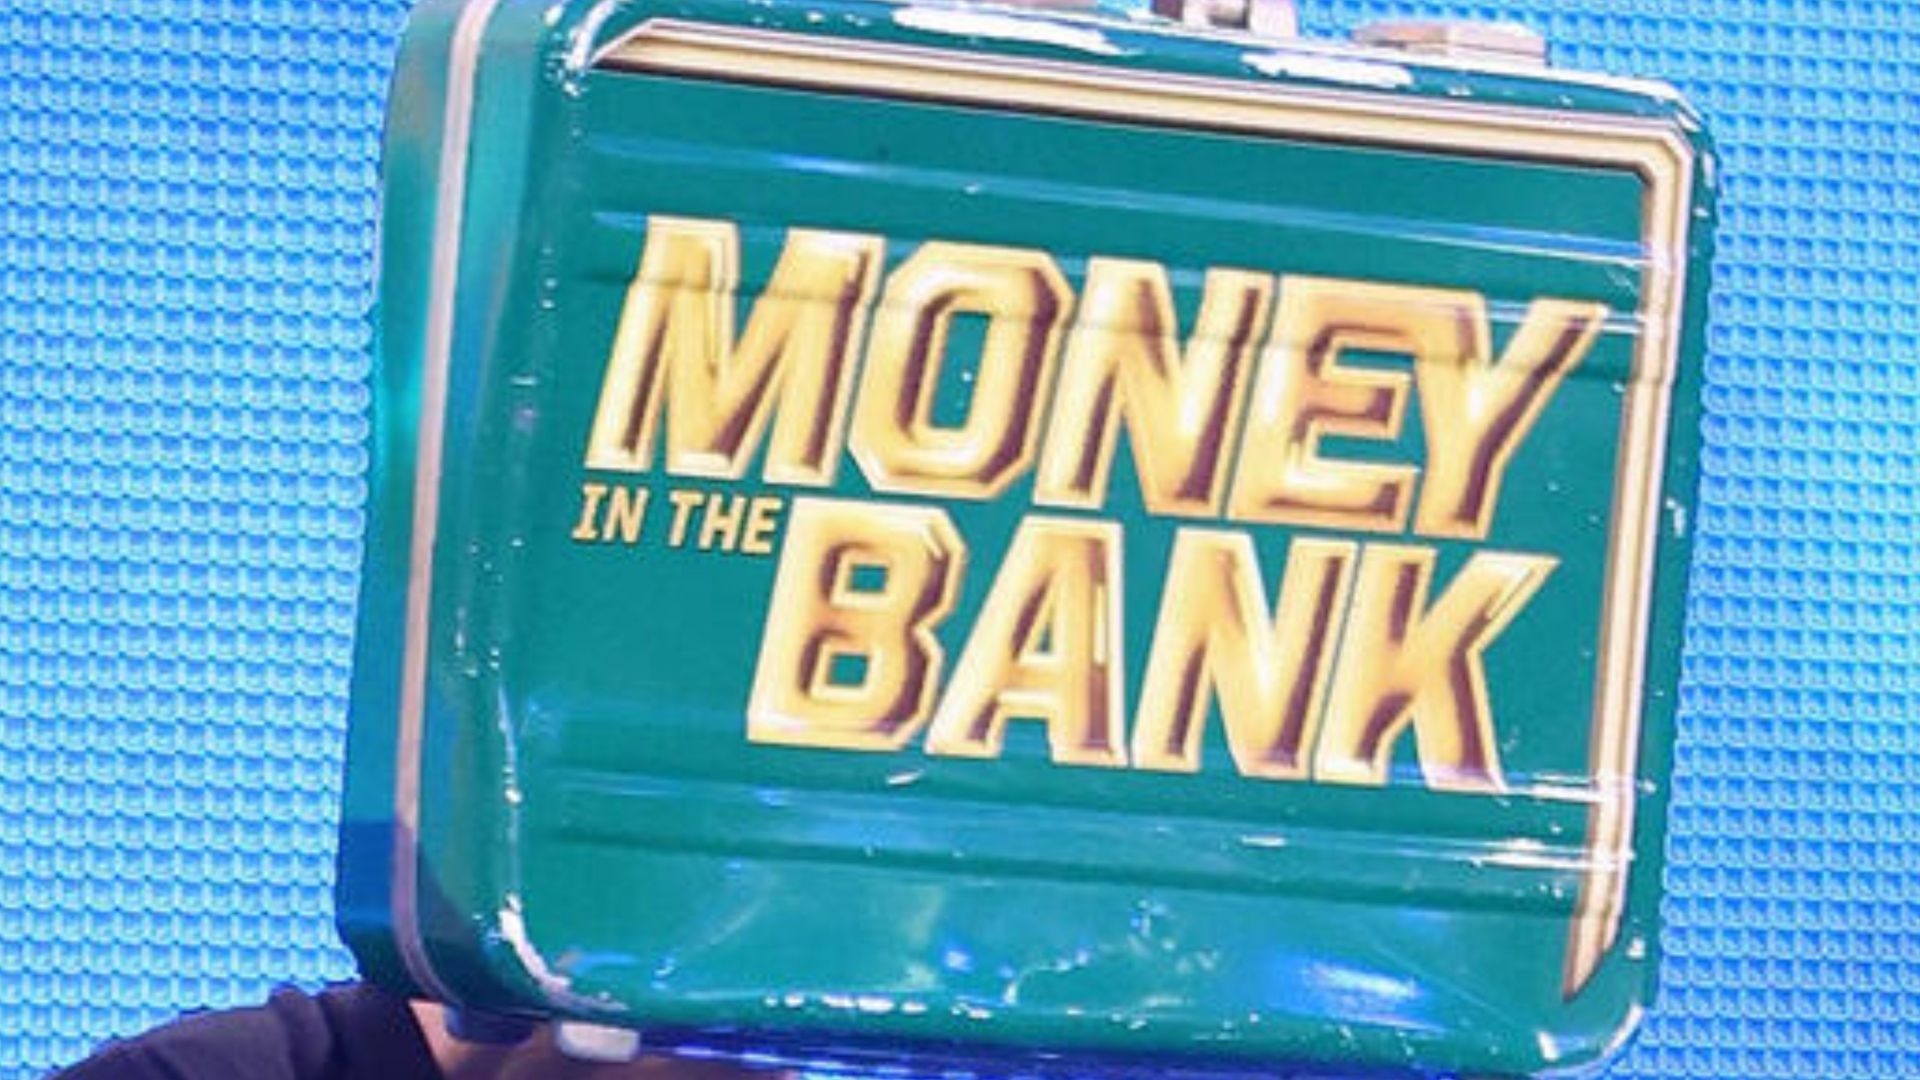 Only one WWE star has declared for Money in the Bank (Image credit: WWE.com)